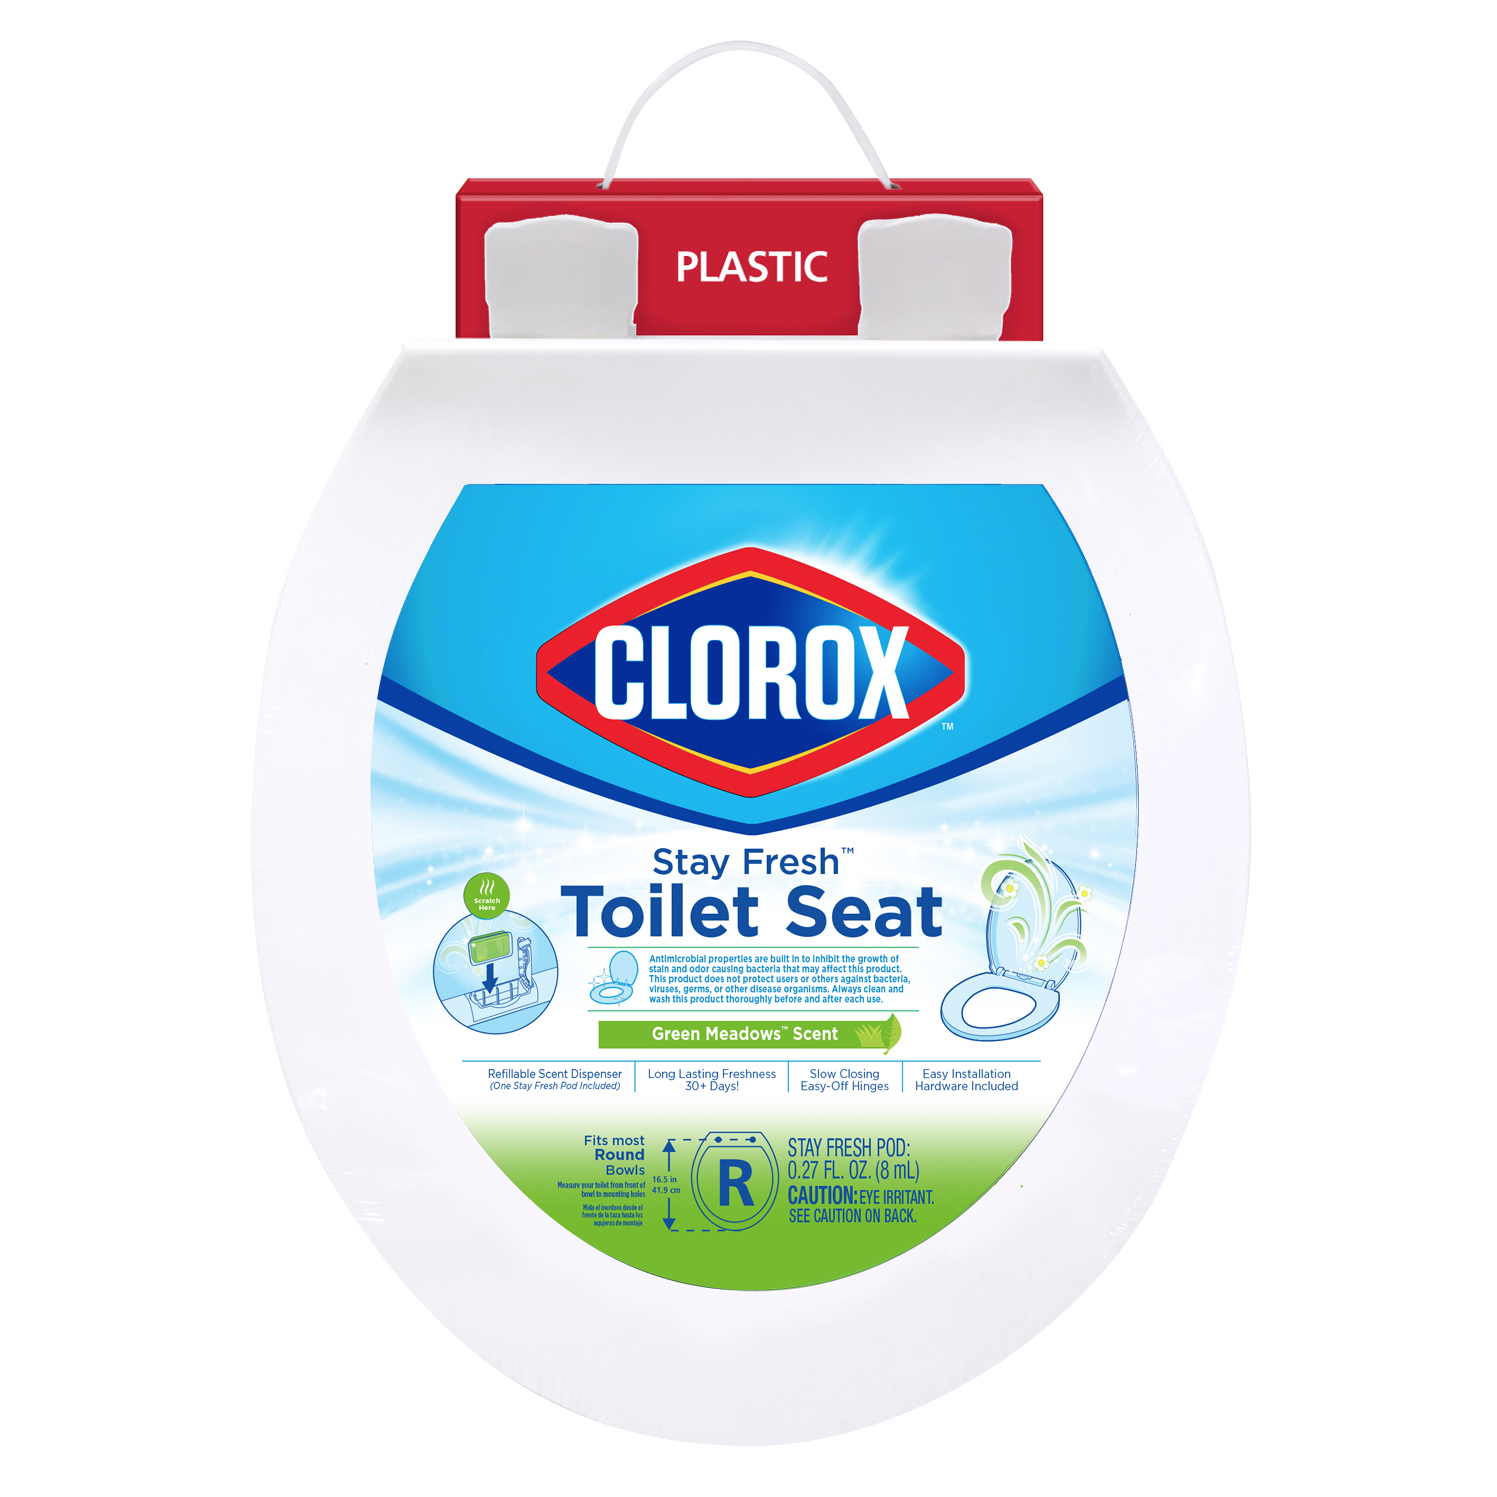 Clorox Antimicrobial Round Stay Fresh Scented Plastic Toilet Seat with Easy-off Hinges - image 2 of 11